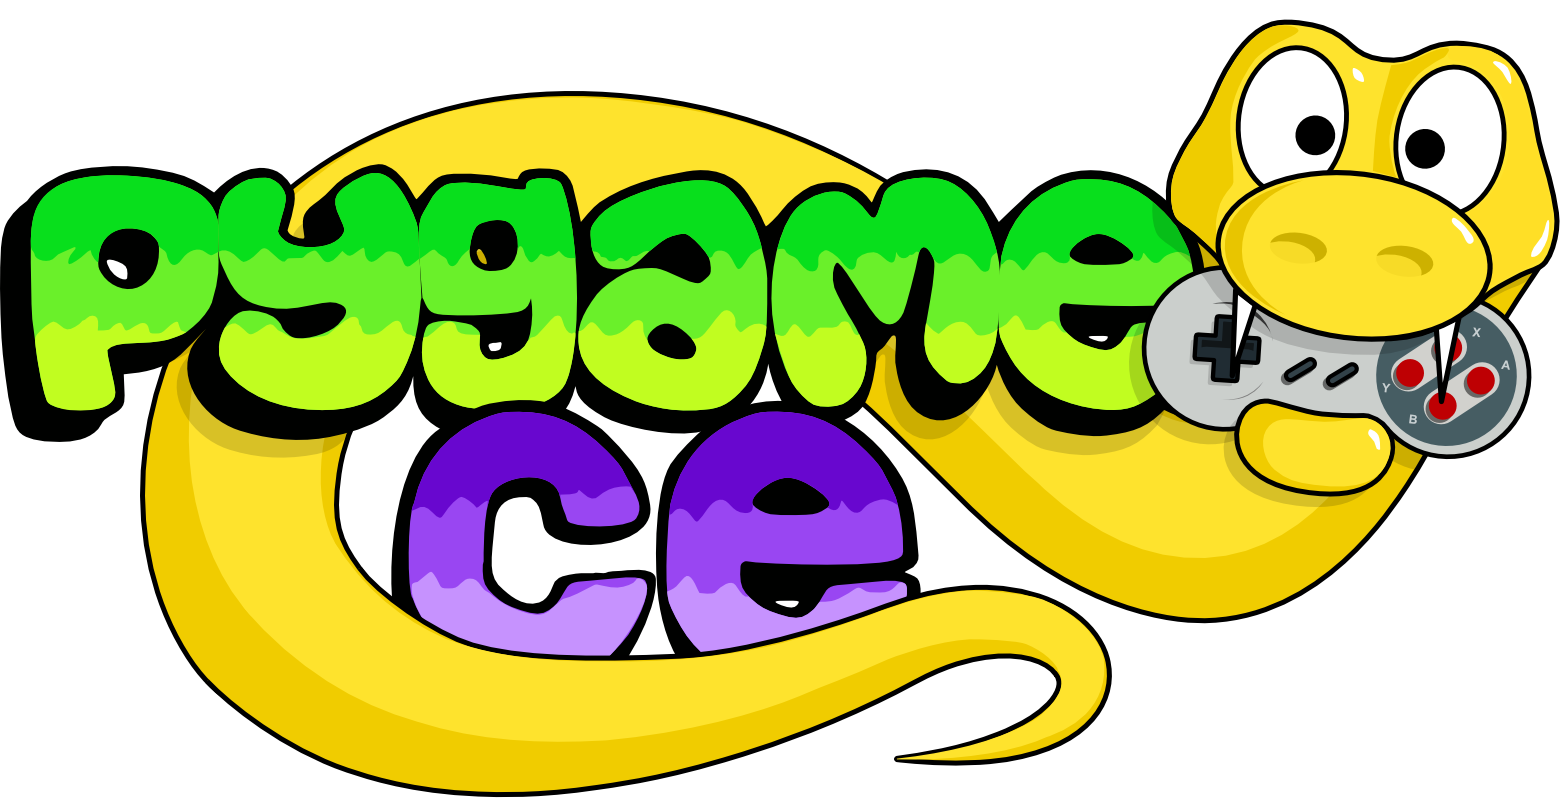 _images/pygame_ce_logo.png